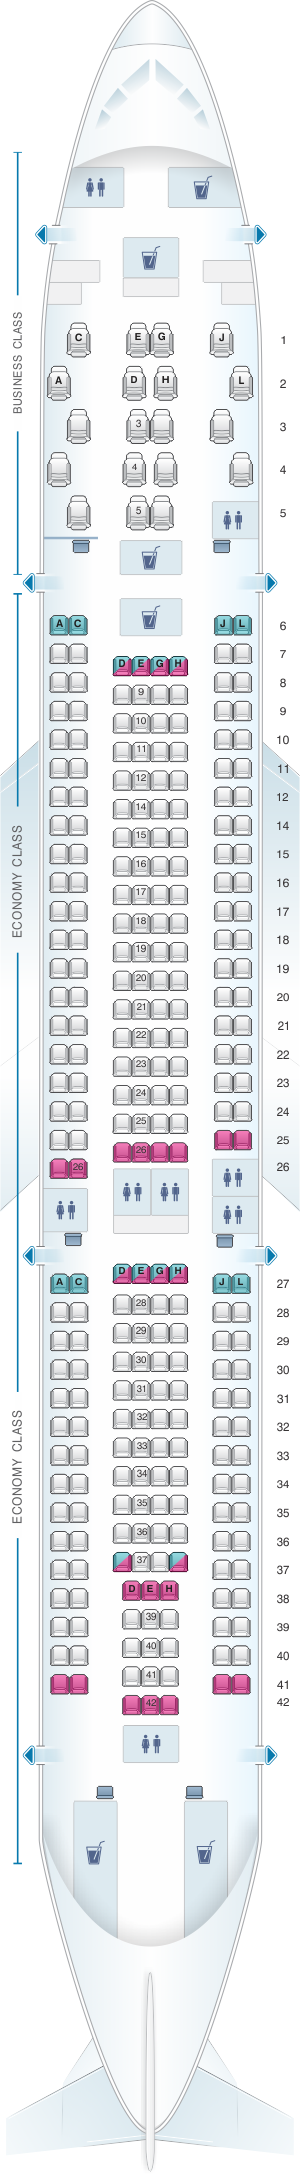 Seat map for Iberia Airbus A330 200